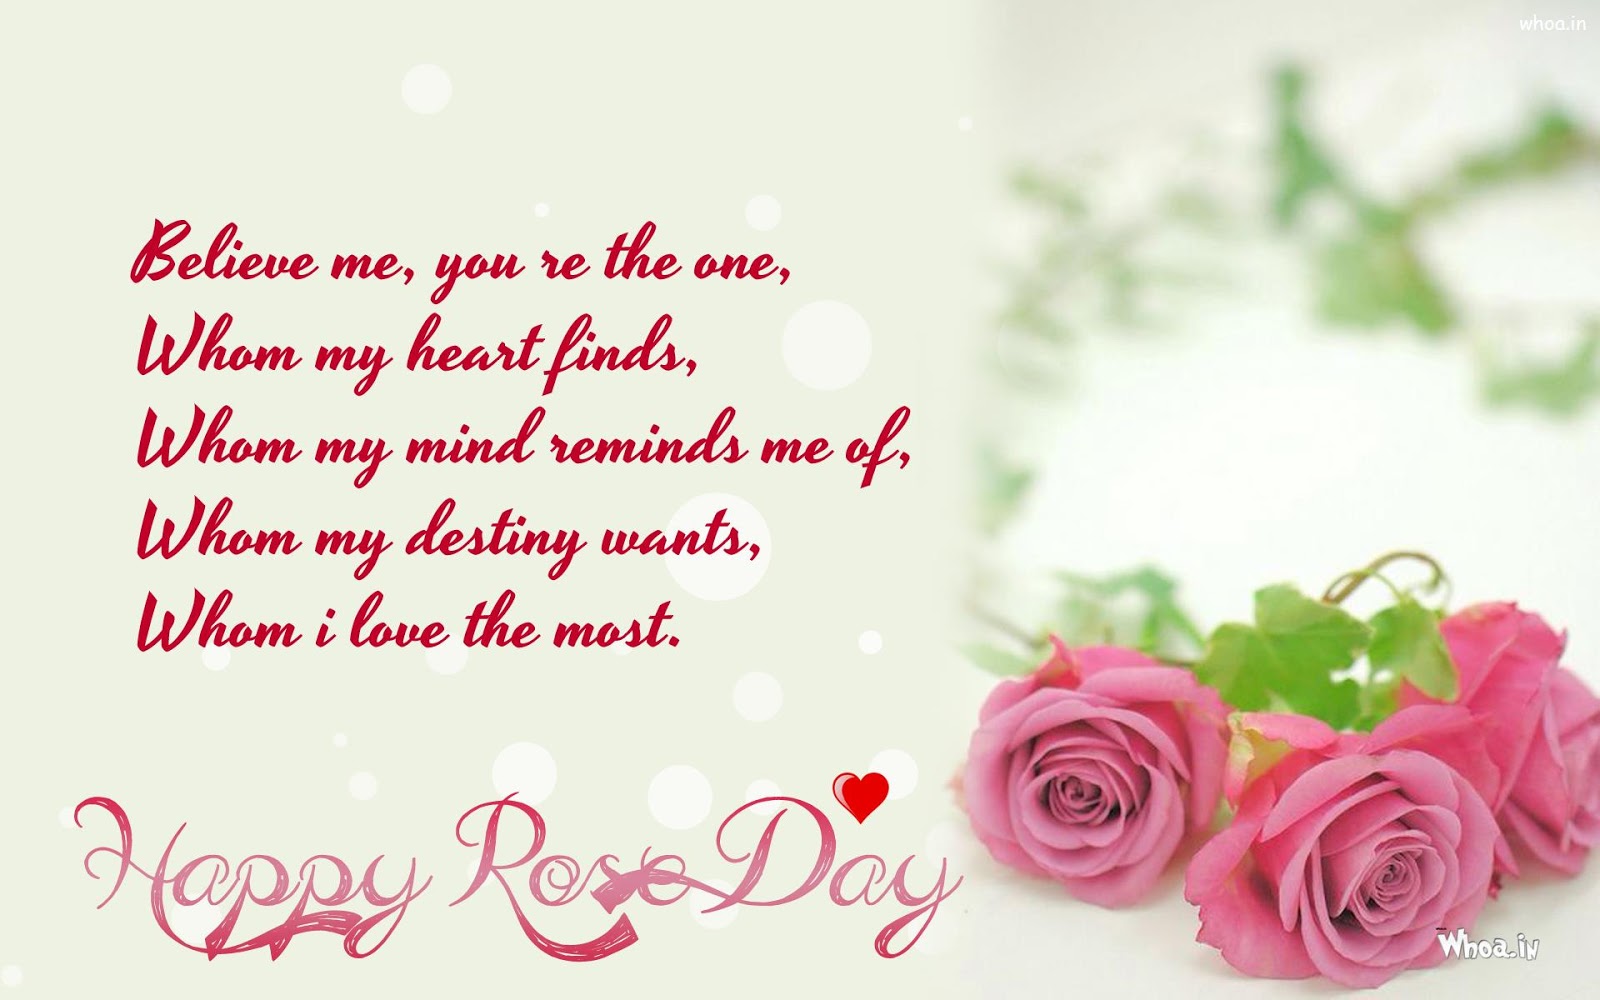 Rose pictures with love quotes